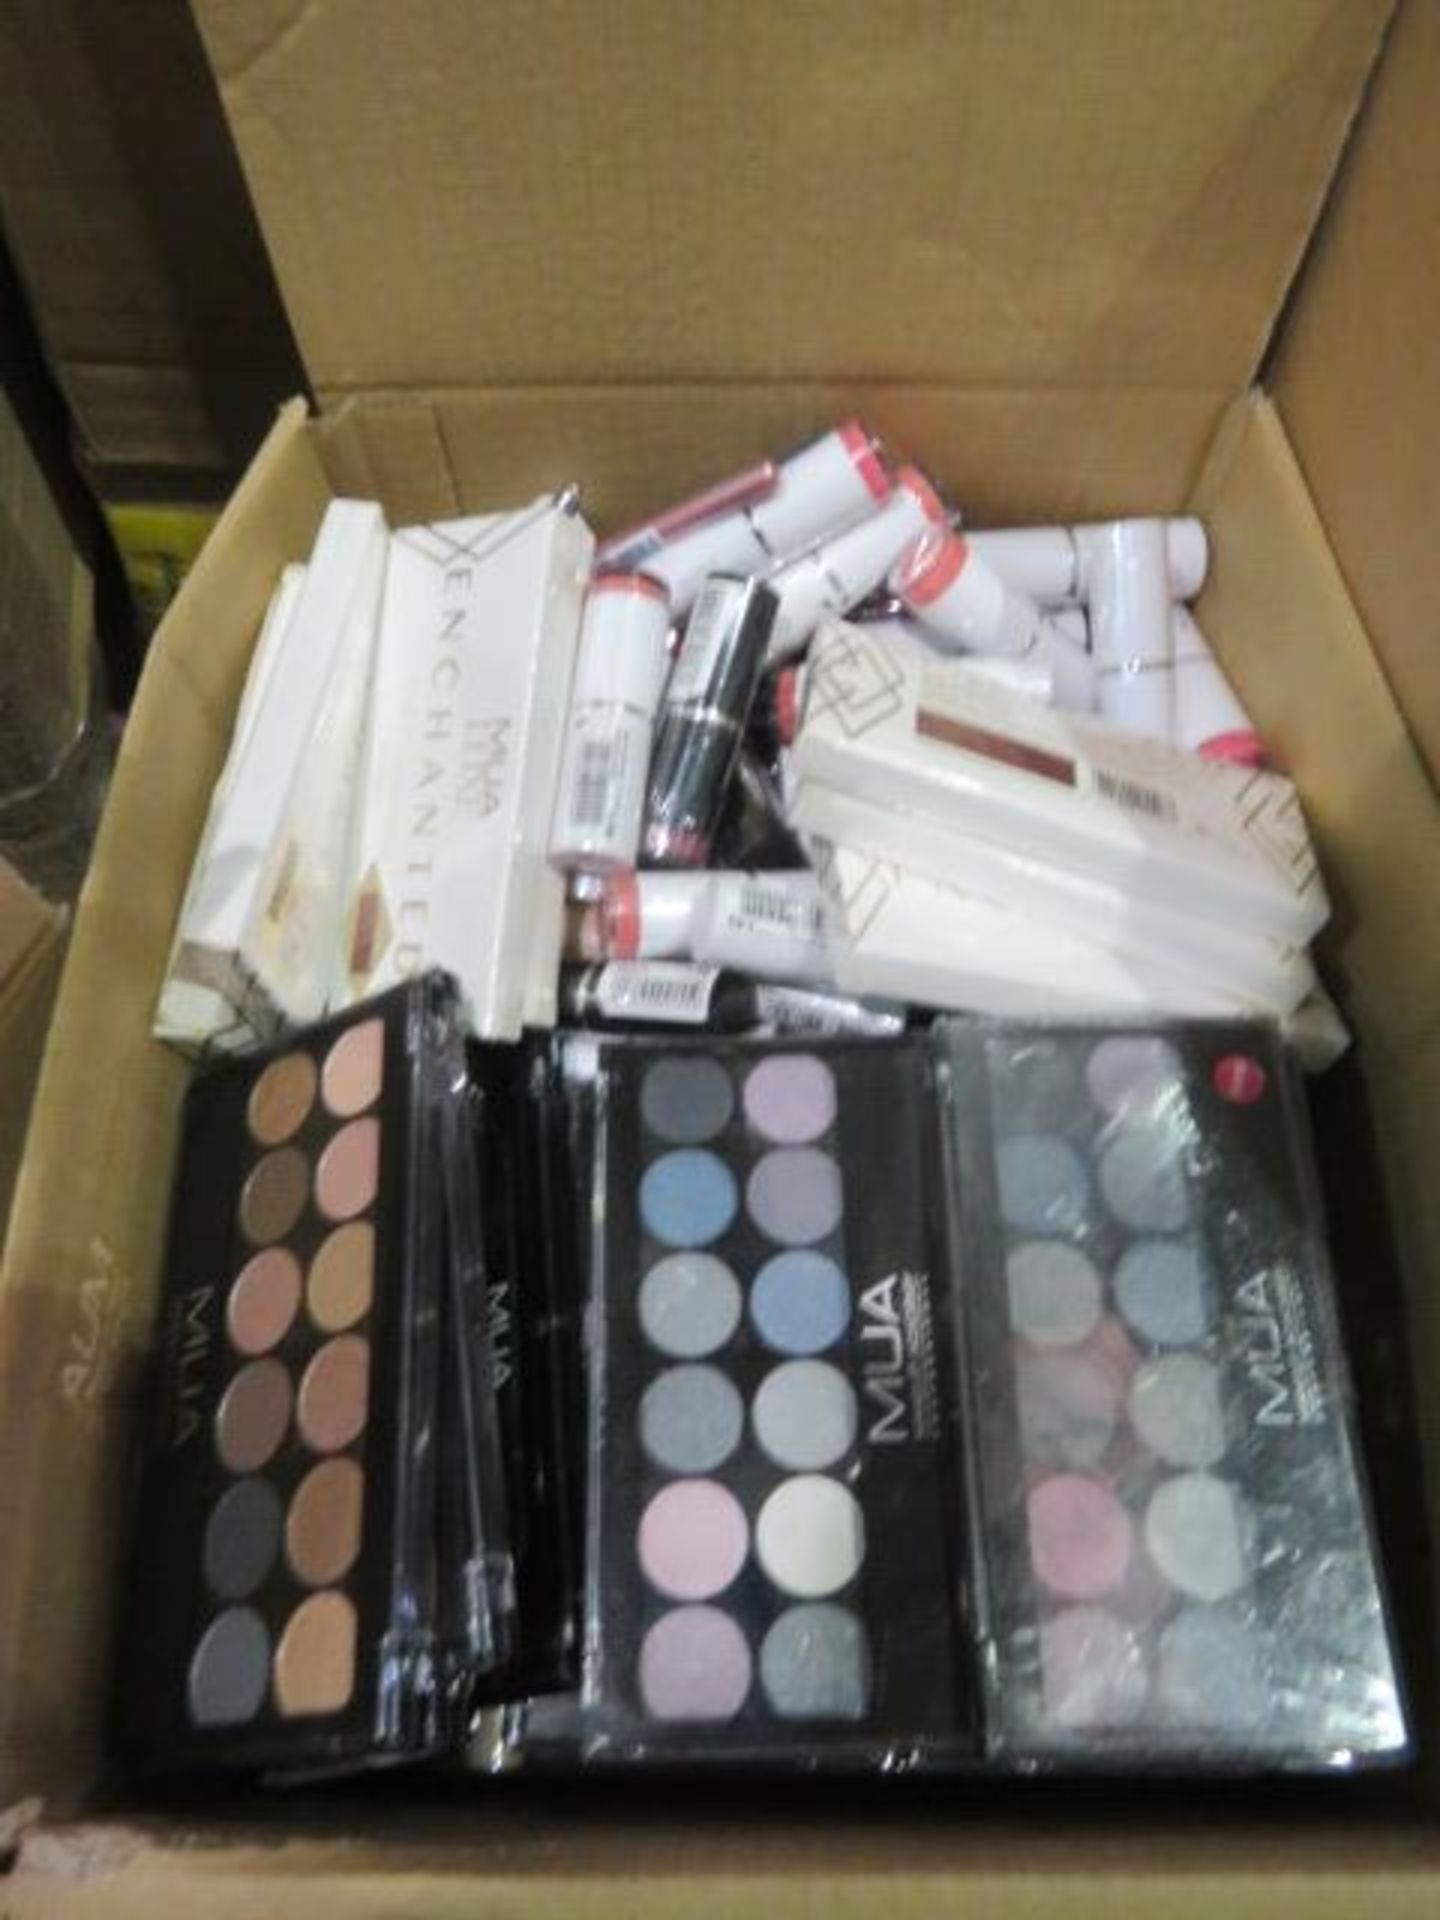 Circa. 200 items of various new make up acadamy make up to include: 12 shade eyeshadow palette,...